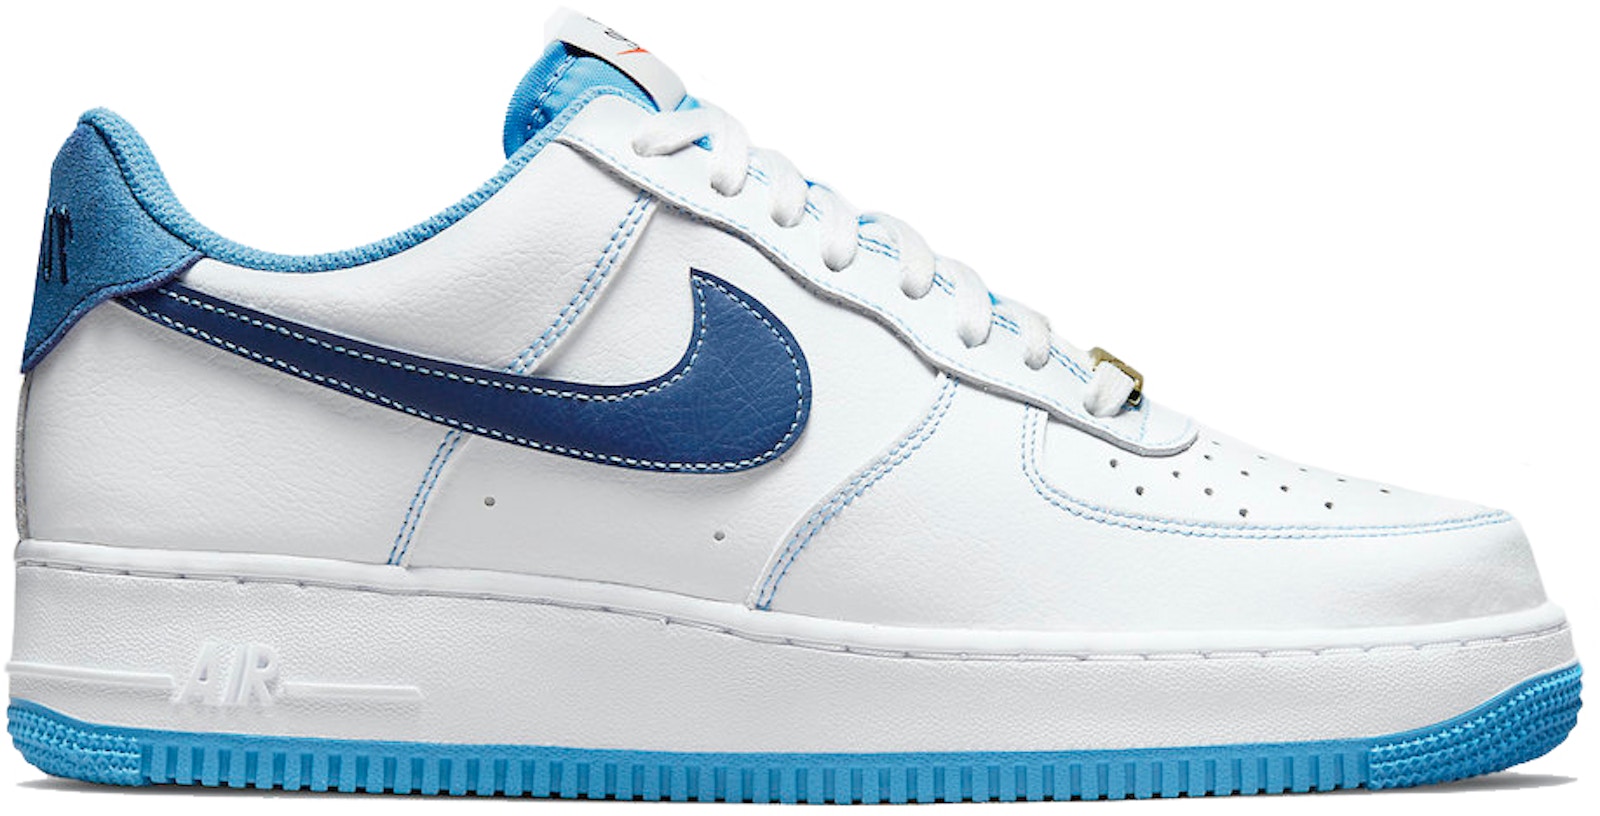 Nike Air Force 1 Low First Use White University Blue DA8478100